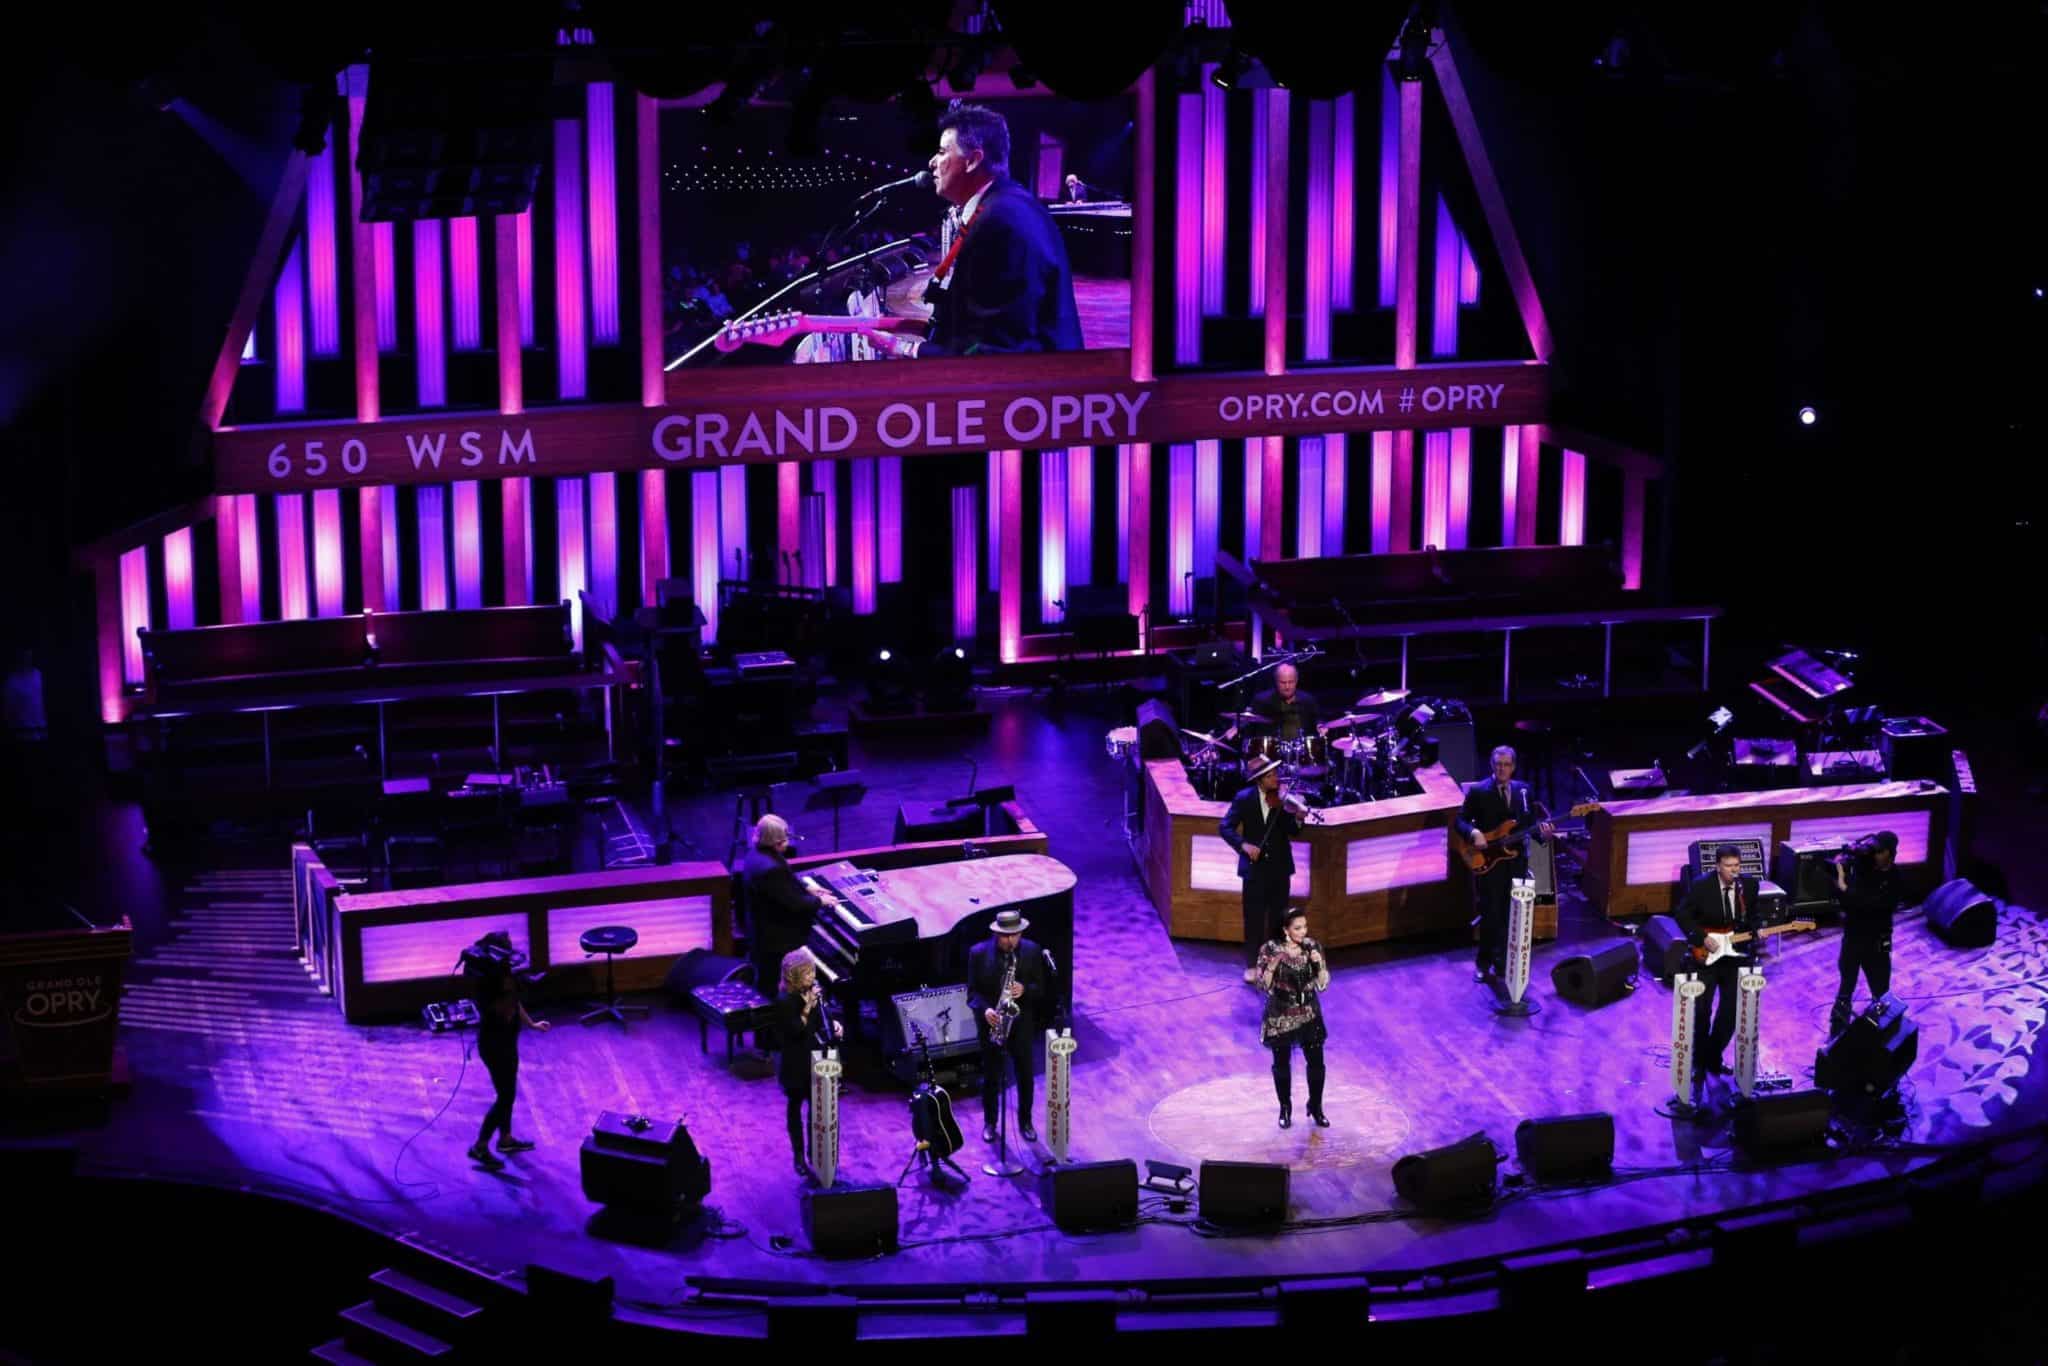 Band at the Grand Ole Opry entertaining Corporate event guests